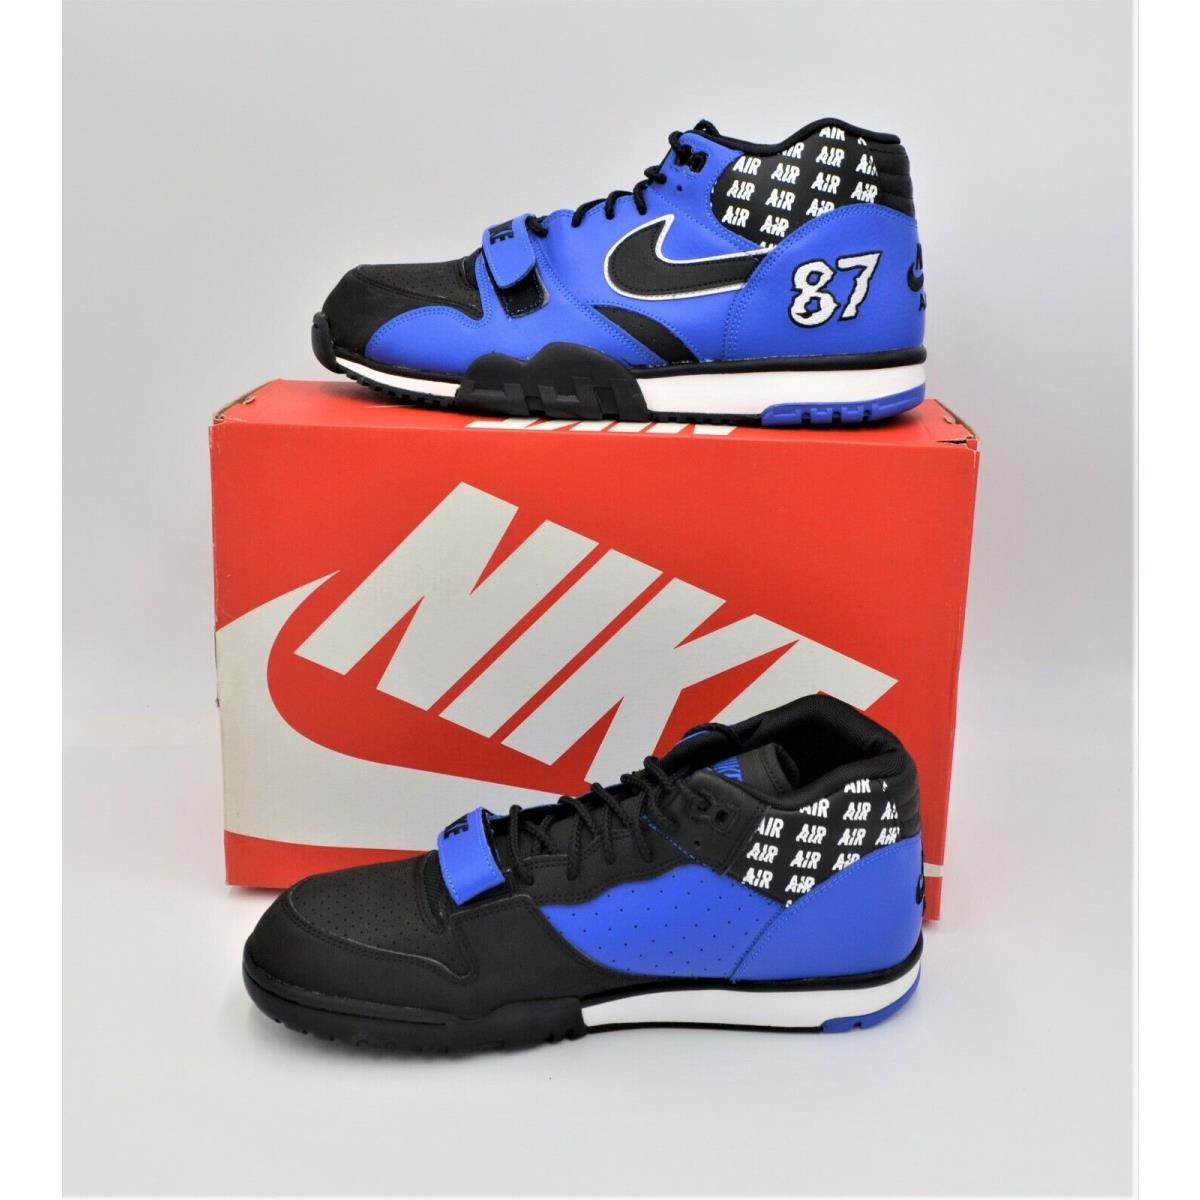 Nike Air Trainer 1 Mid Soa Men`s Shoes Size 12 Hyper AQ5099-400 | 885178993879 - Nike shoes Air Trainer | SporTipTop